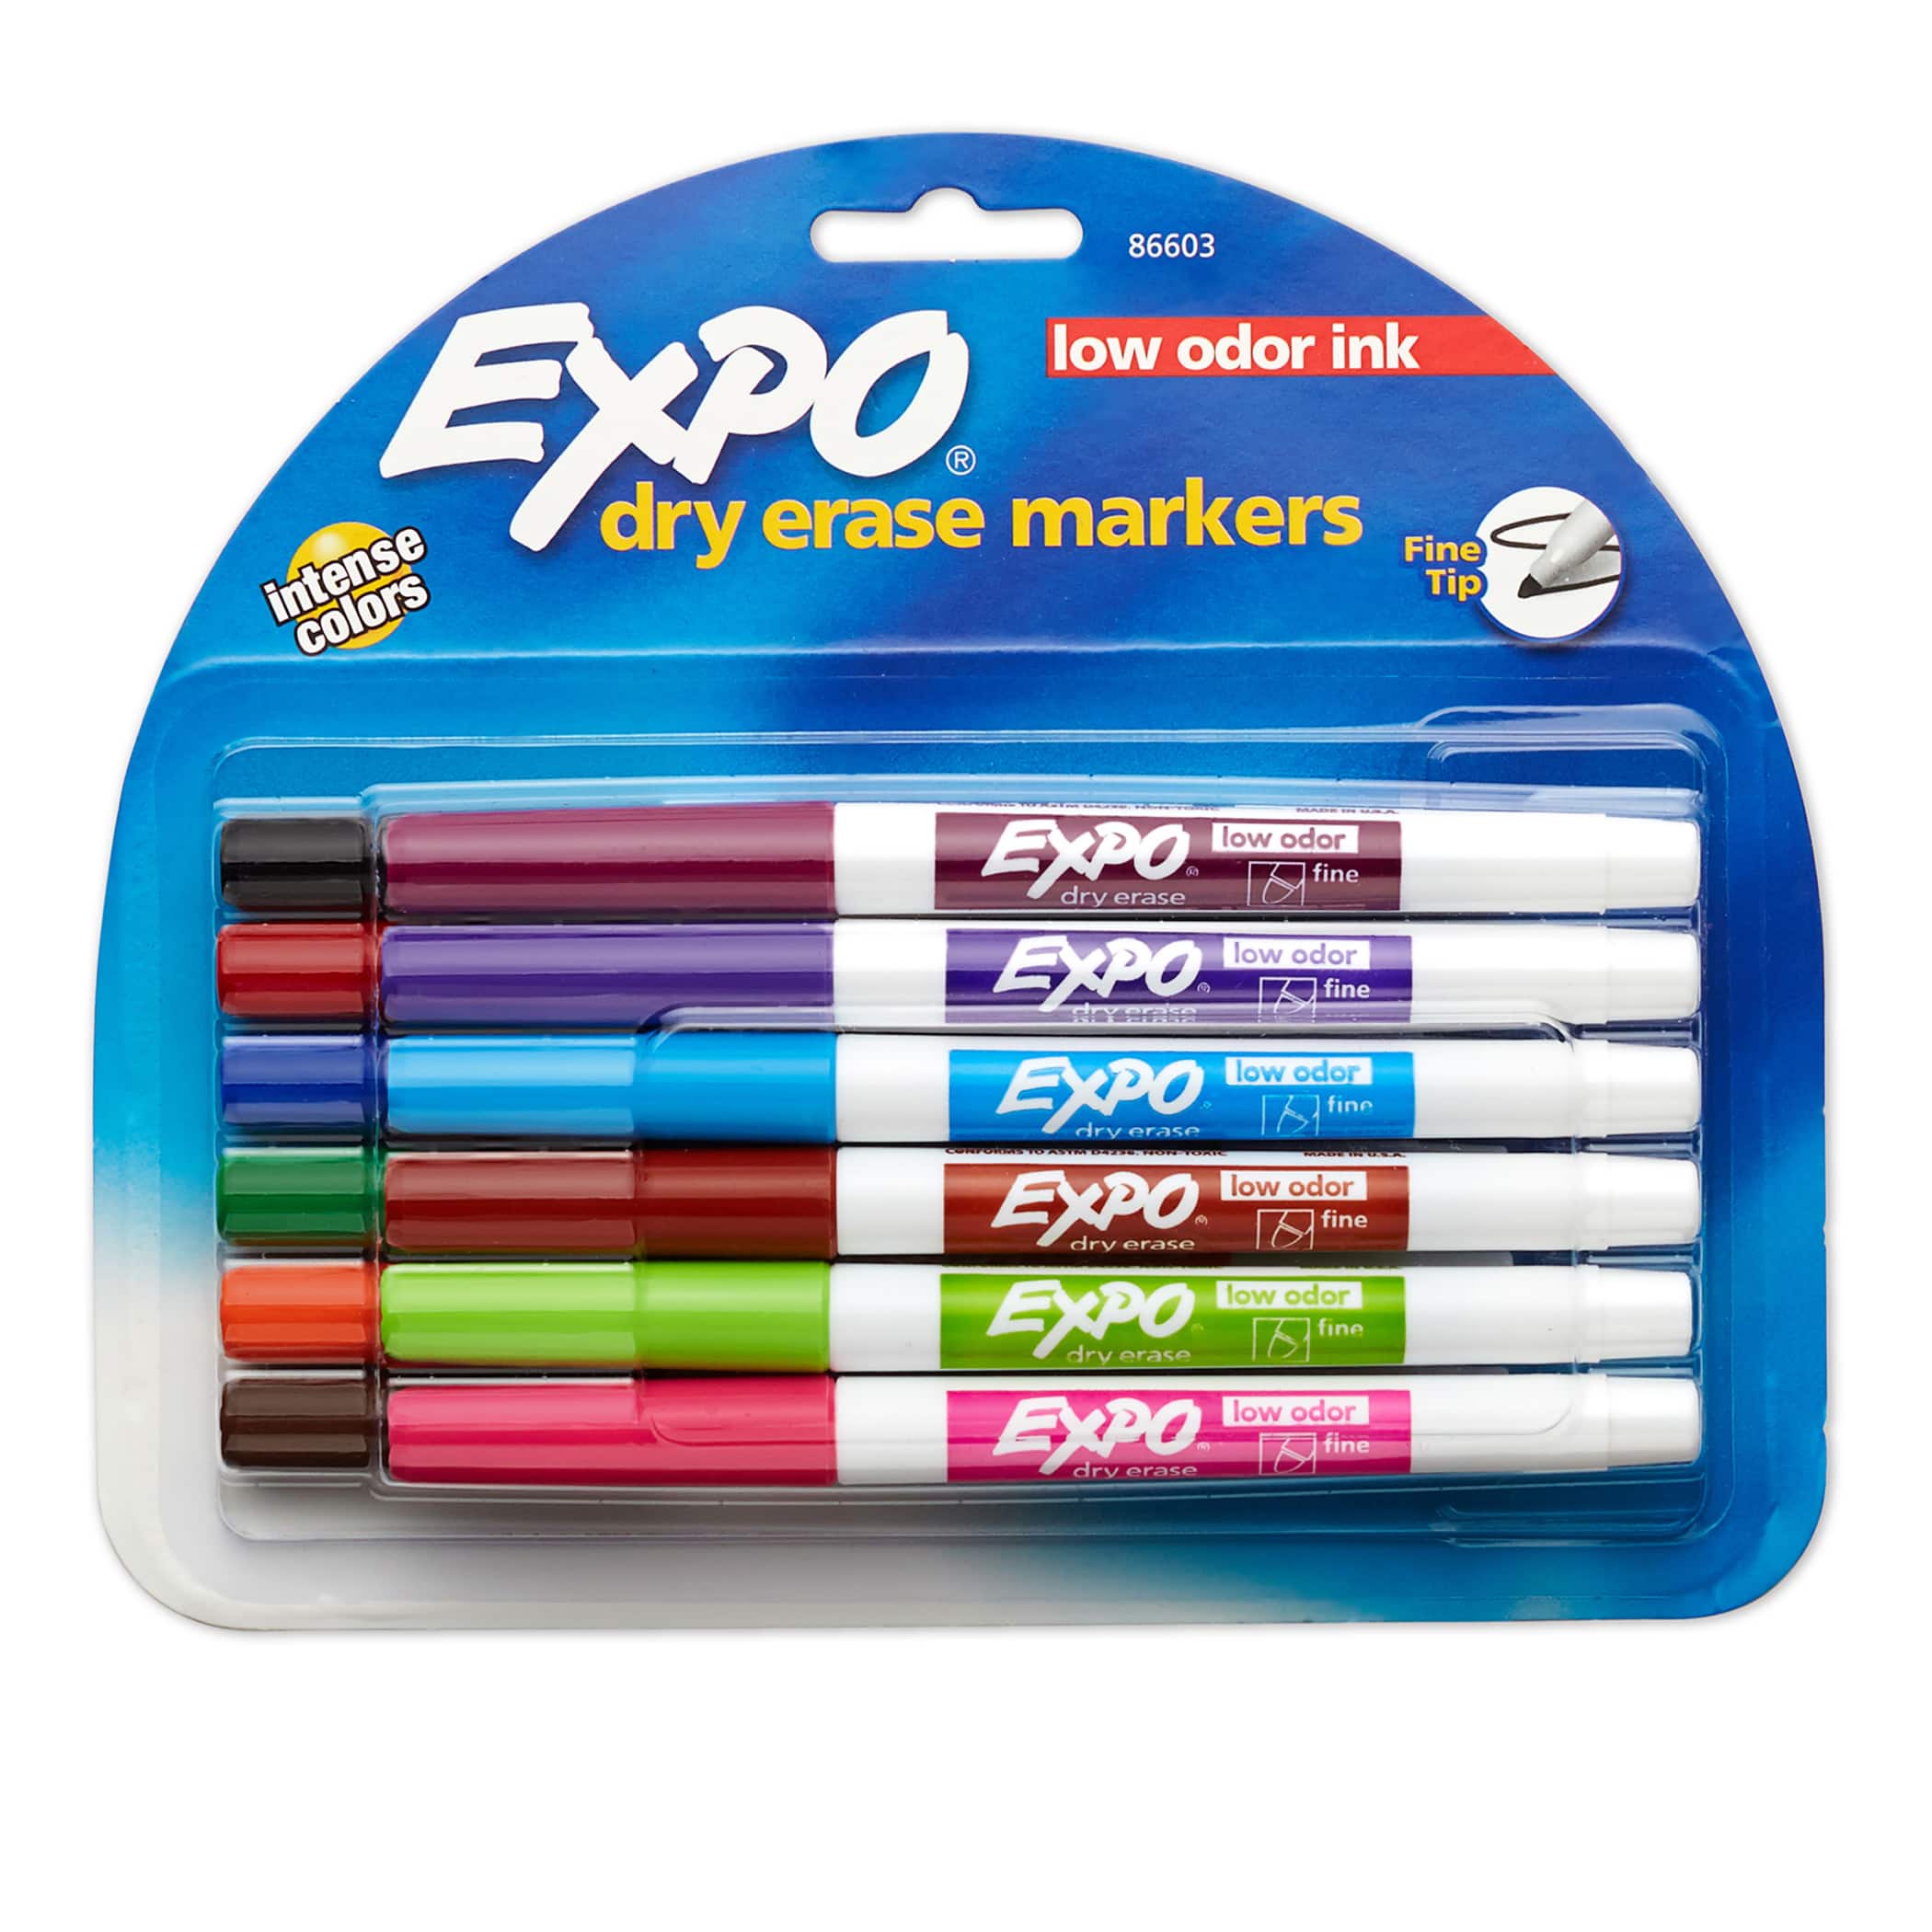 VUSIGN Dry Erase Markers, 12 Pack White Board Markers Dry Erase, Whiteboard  Markers for Kids, Fine Tip, Low Odor, Assorted Colors